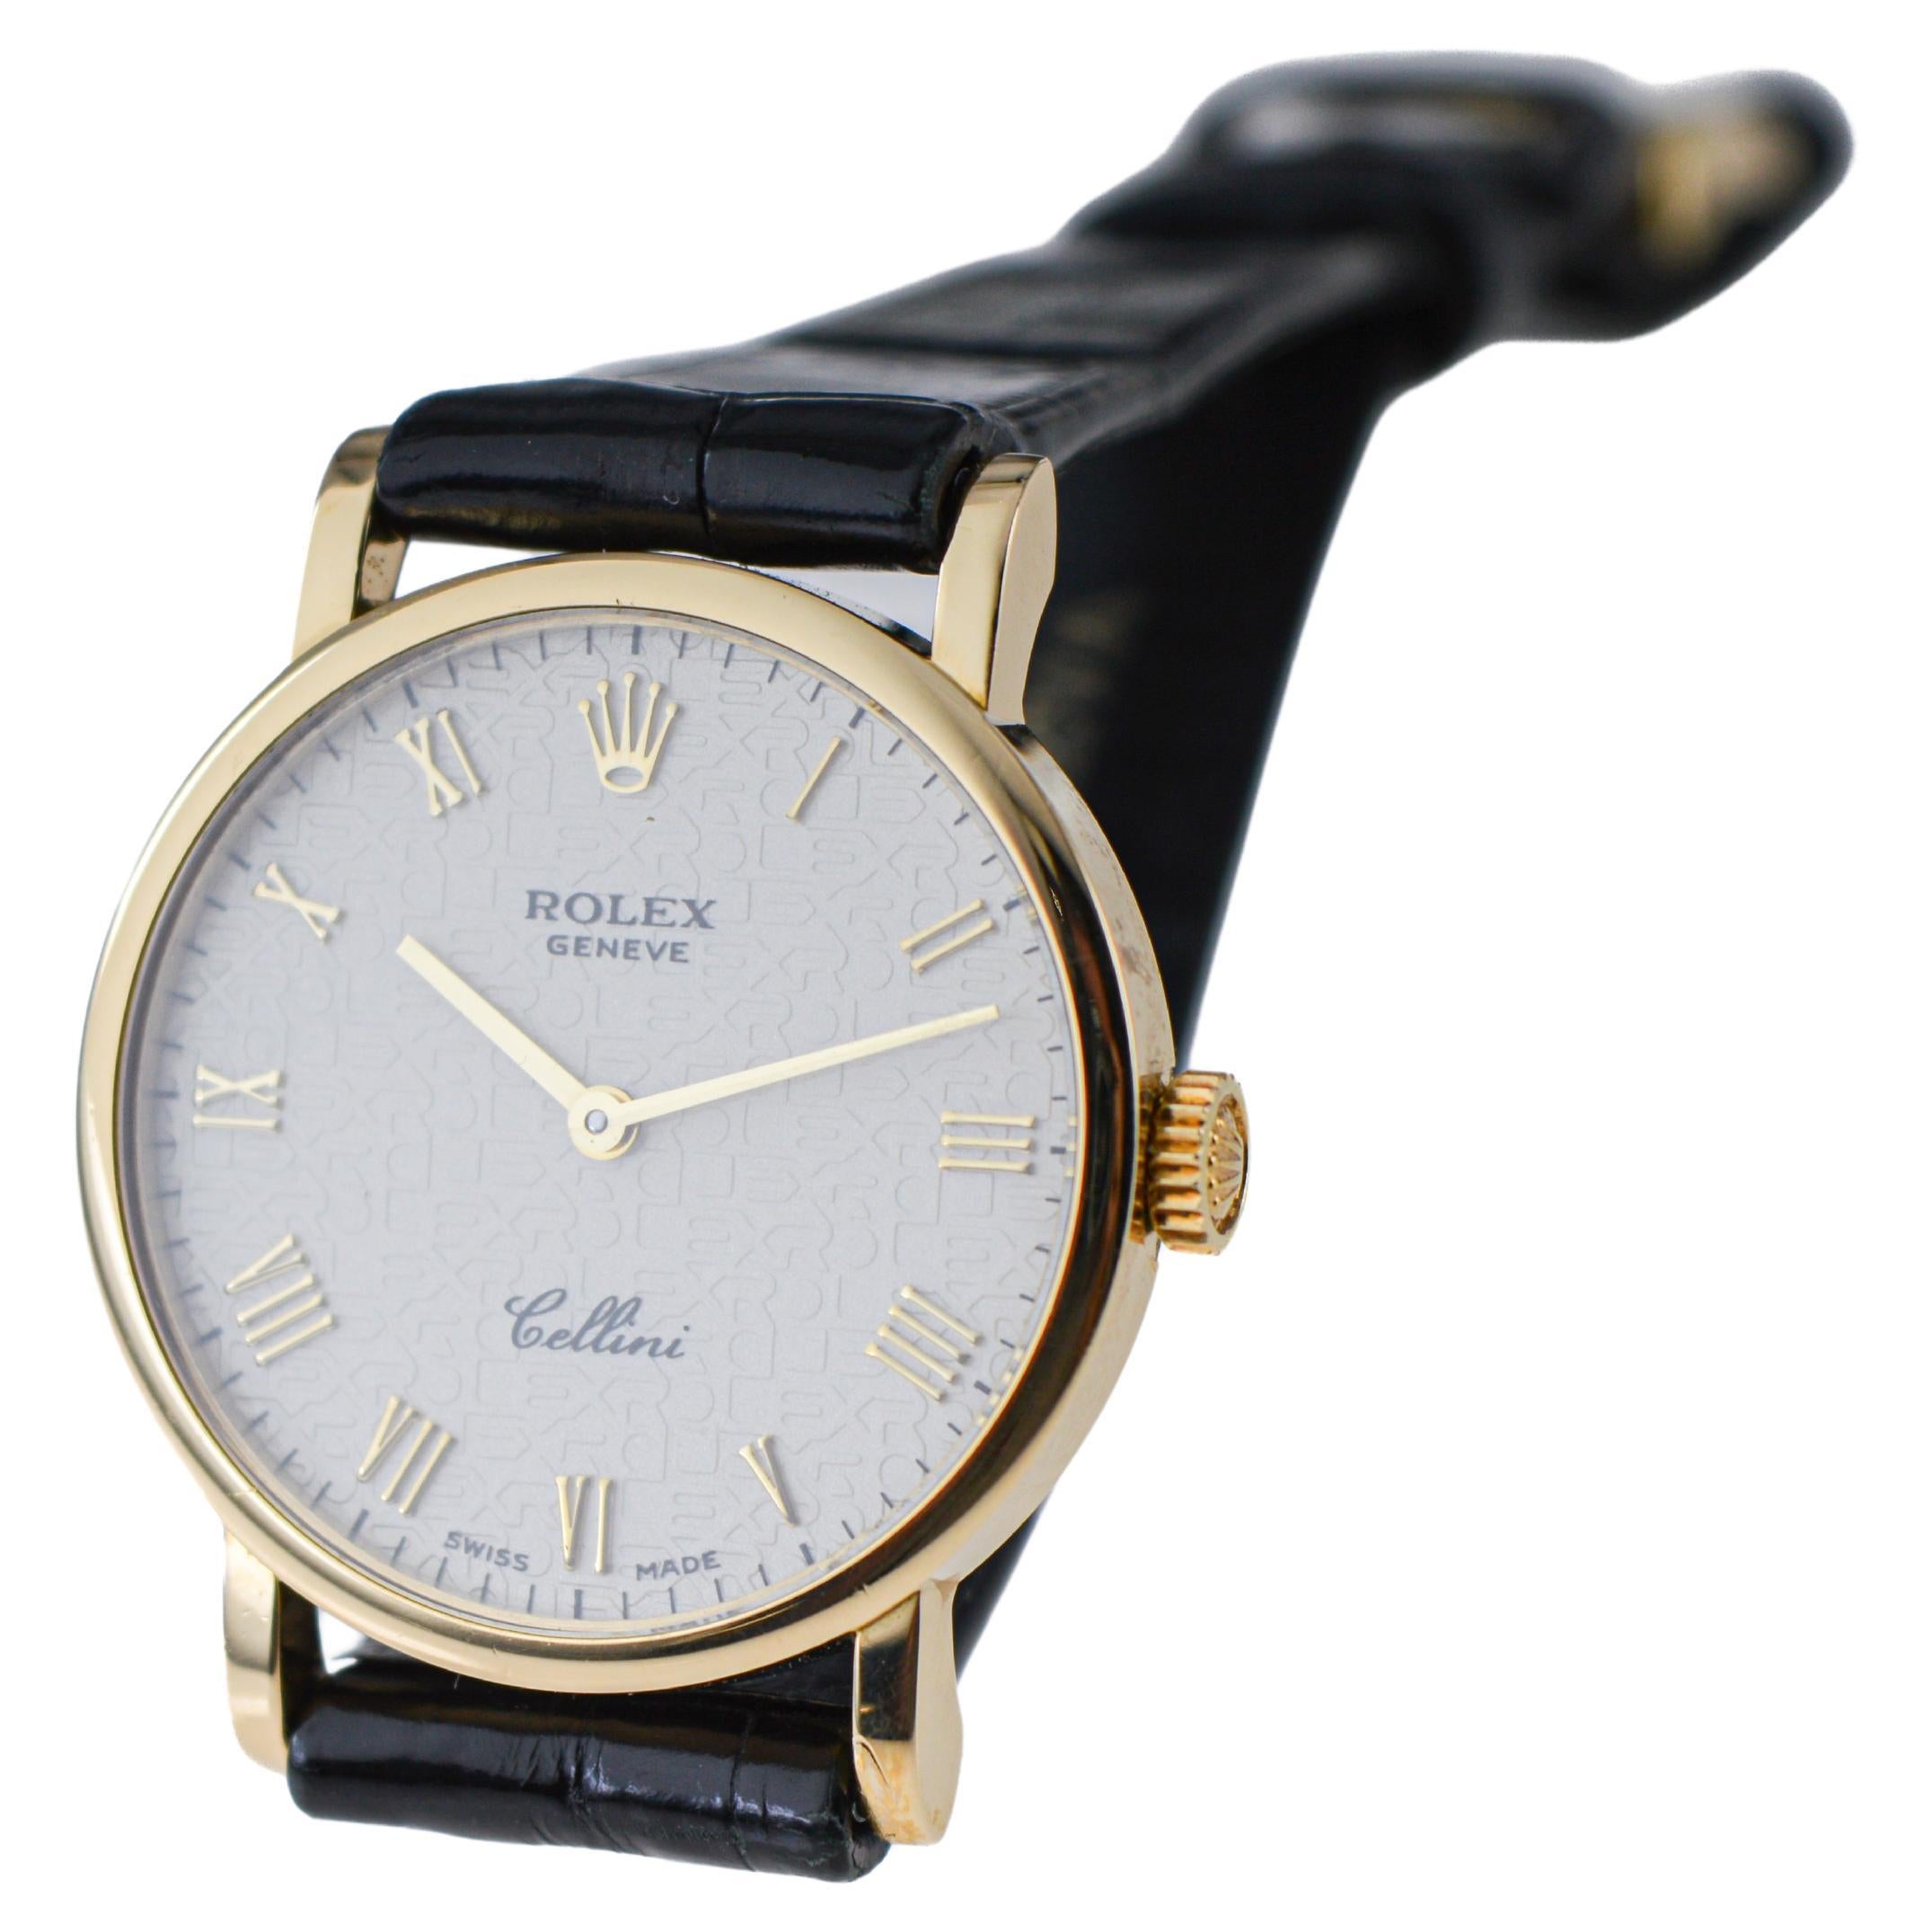  Rolex Cellini 18Kt. Solid Gold Ladies Watch with Original Strap and Buckle  5